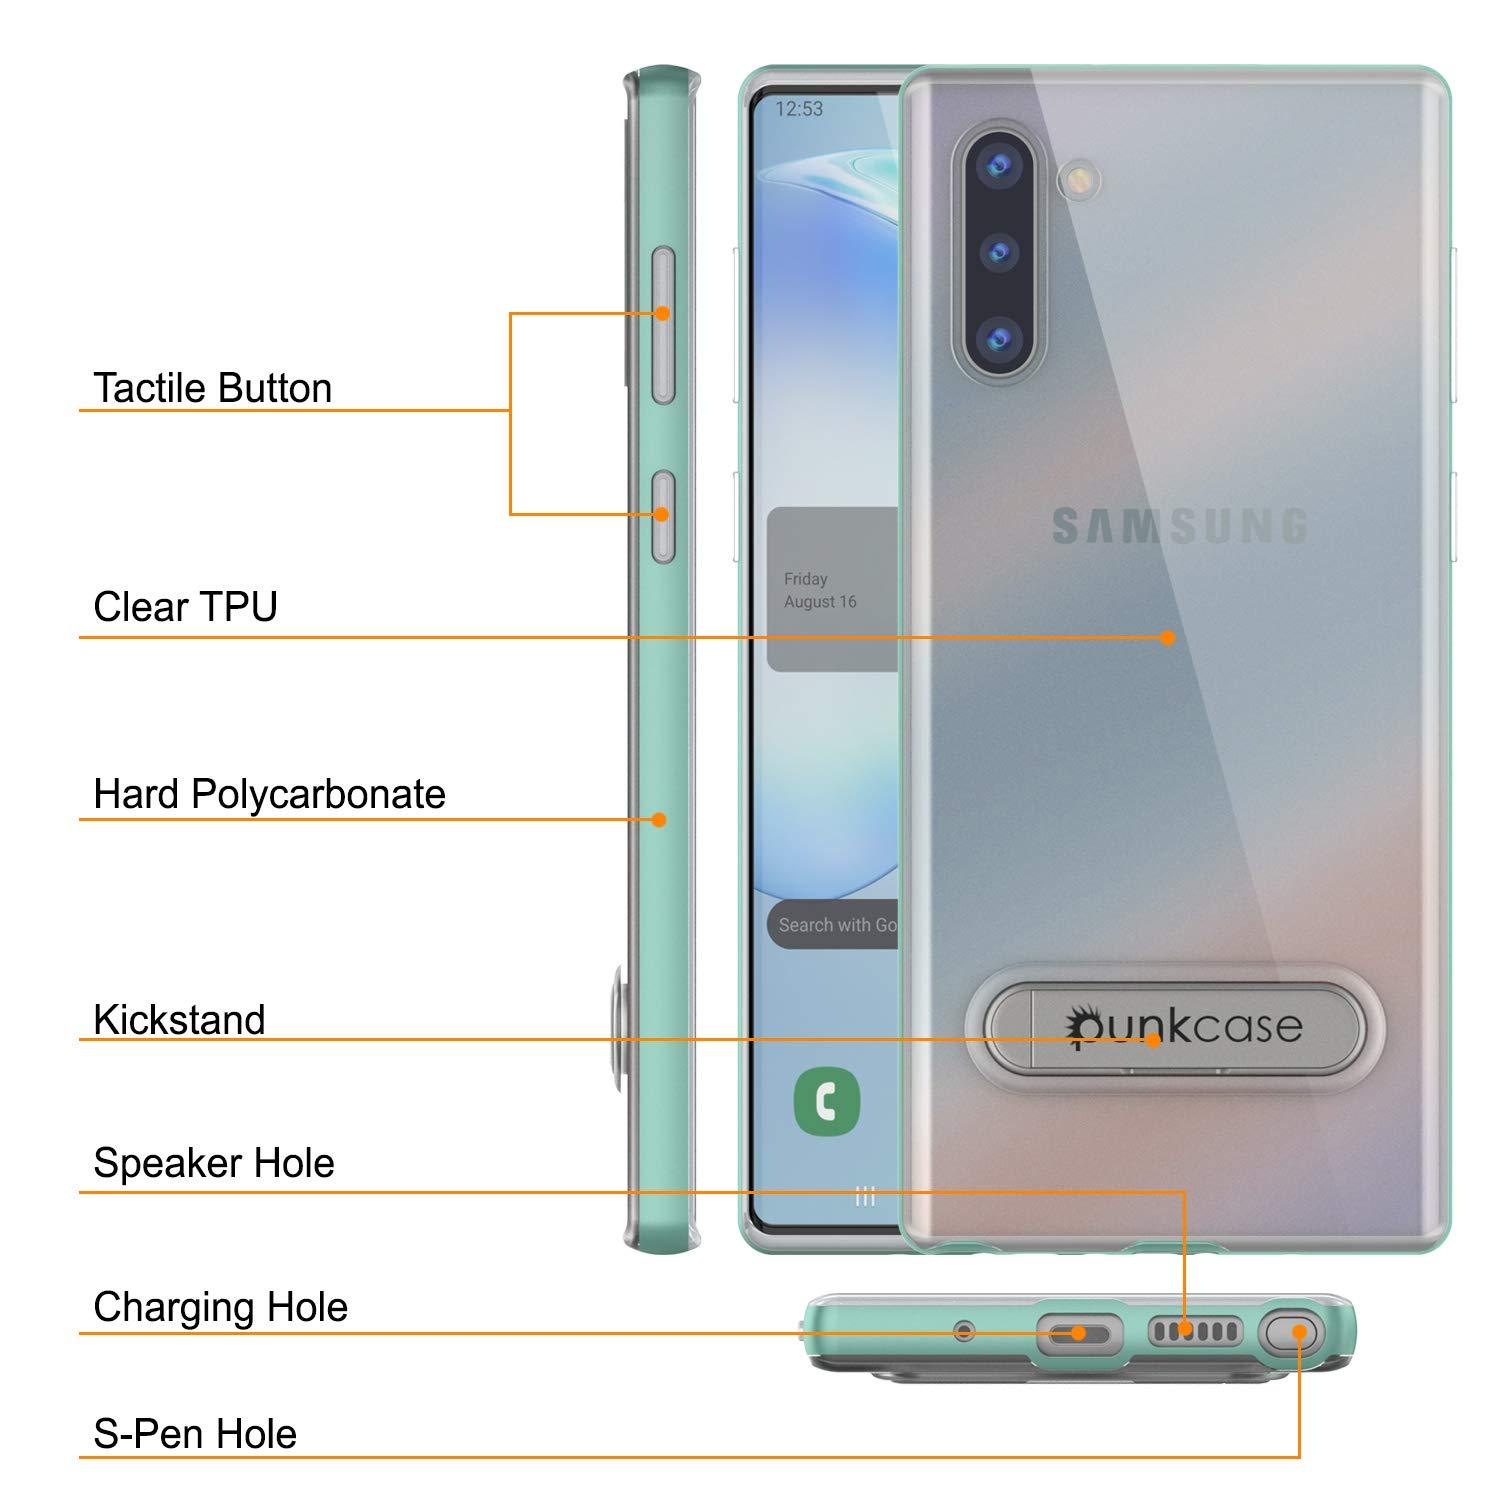 Galaxy Note 10 Lucid 3.0 PunkCase Armor Cover w/Integrated Kickstand and Screen Protector [Teal]